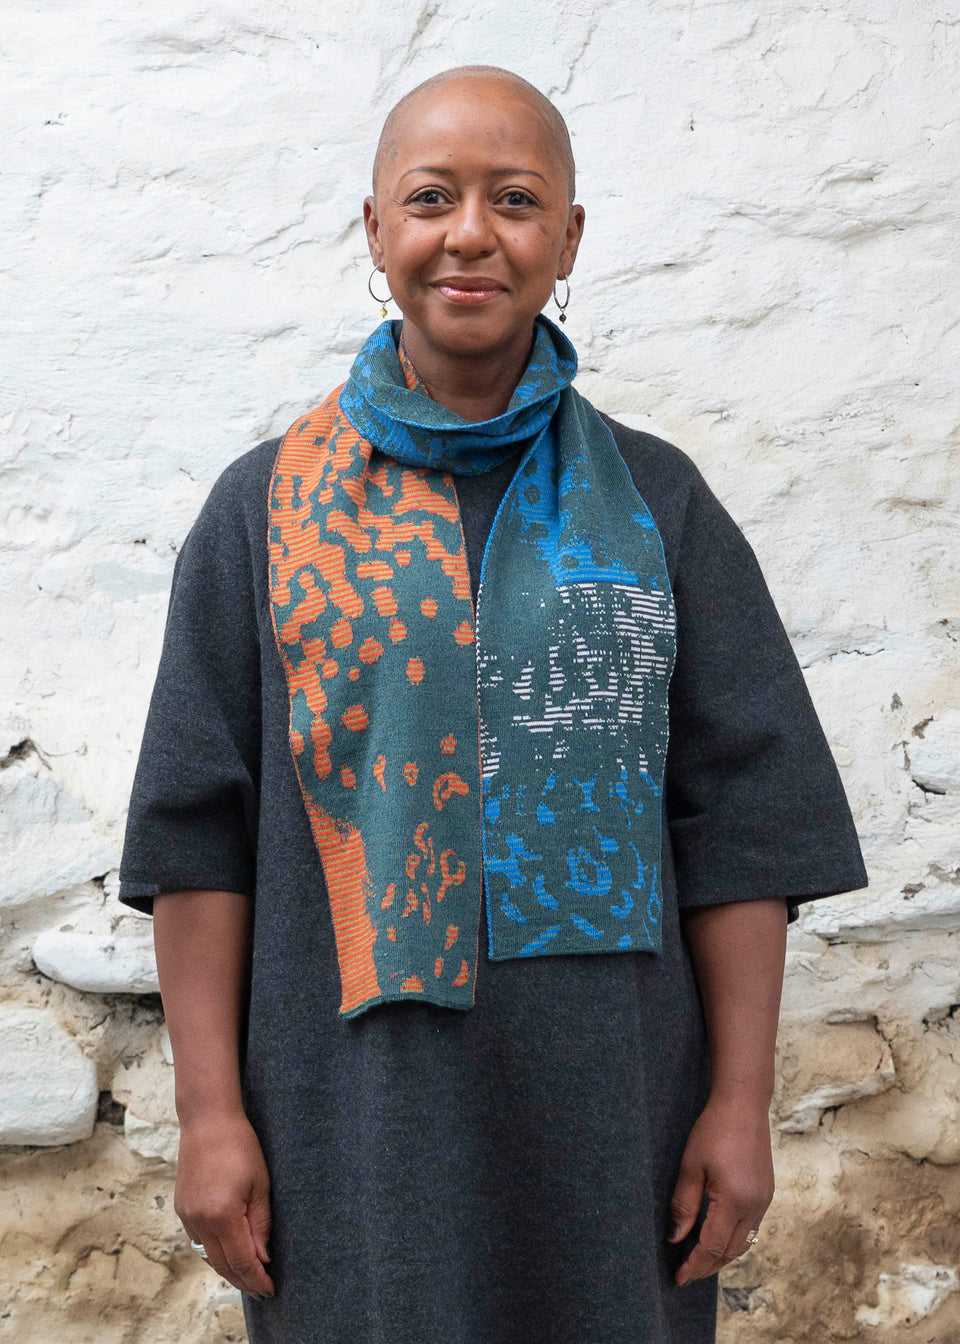 A black woman with a shaved head stands in a rustic, whitewashed stone building in Shetland. She wears a charcoal woollen dress with elbow-length sleeves. Over this she wears a finely knitted Scottish made scarf in a stripey and mottled pattern. Greens, blues and oranges interchange. She looks at the camera and smiles.